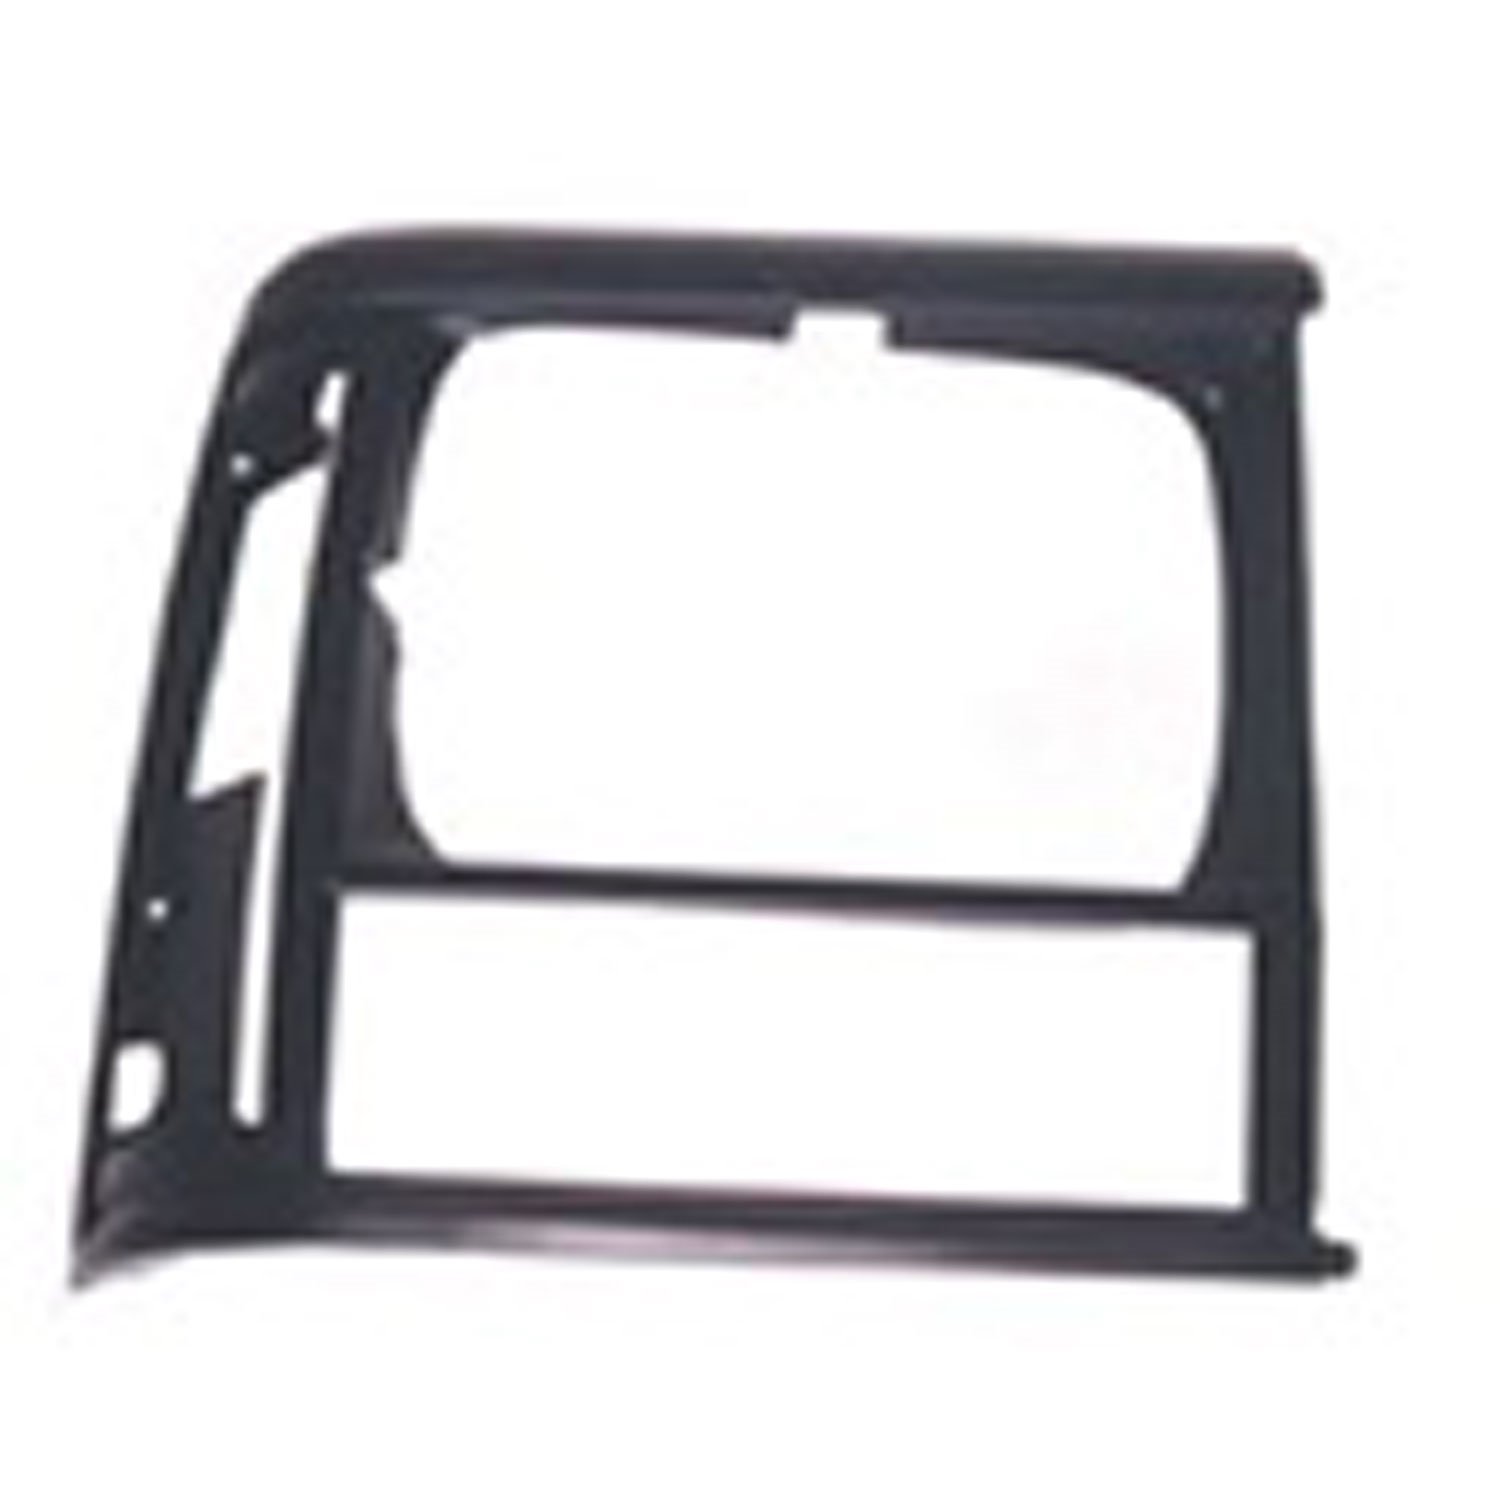 This black headlight bezel from Omix-ADA fits the left side on 91-96 Jeep Cherokee XJ.